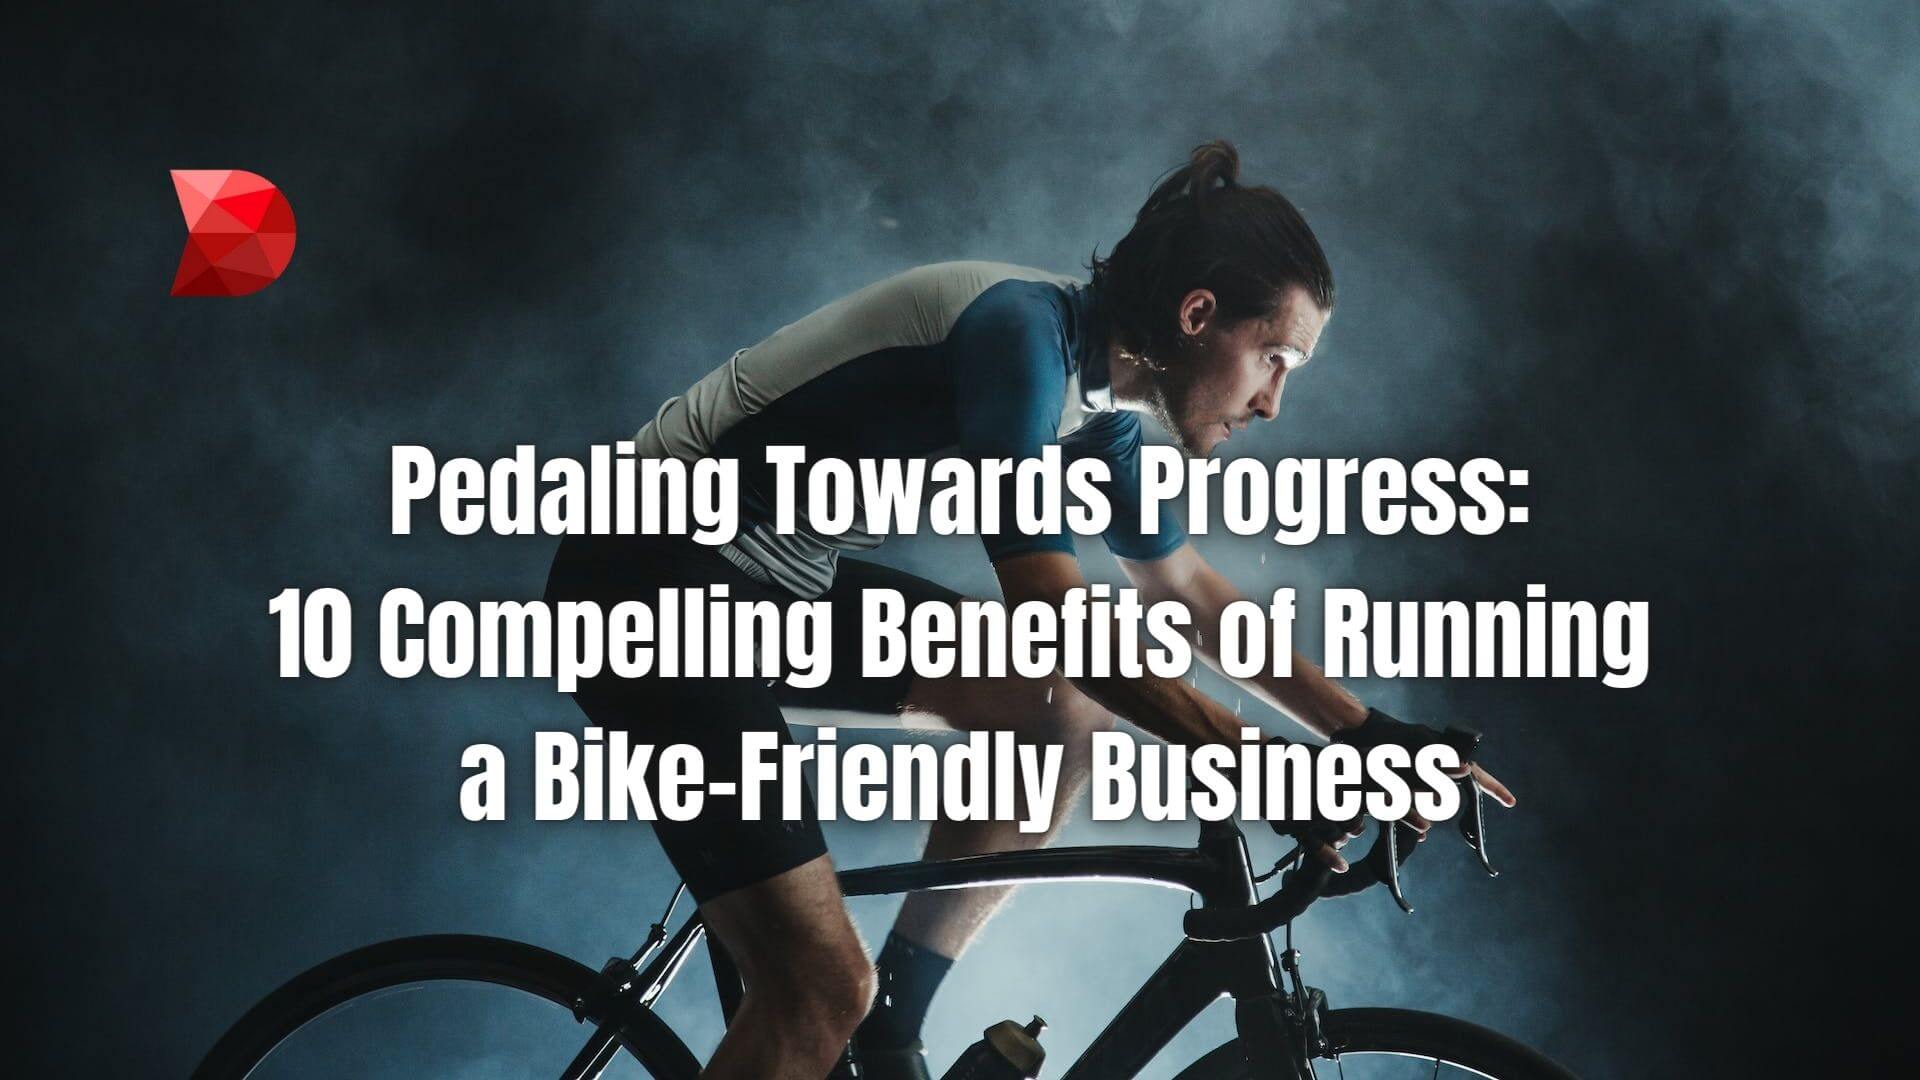 Unlock the perks of a bike-friendly business! Click here to learn 10 compelling benefits to enhance sustainability and employee well-being!